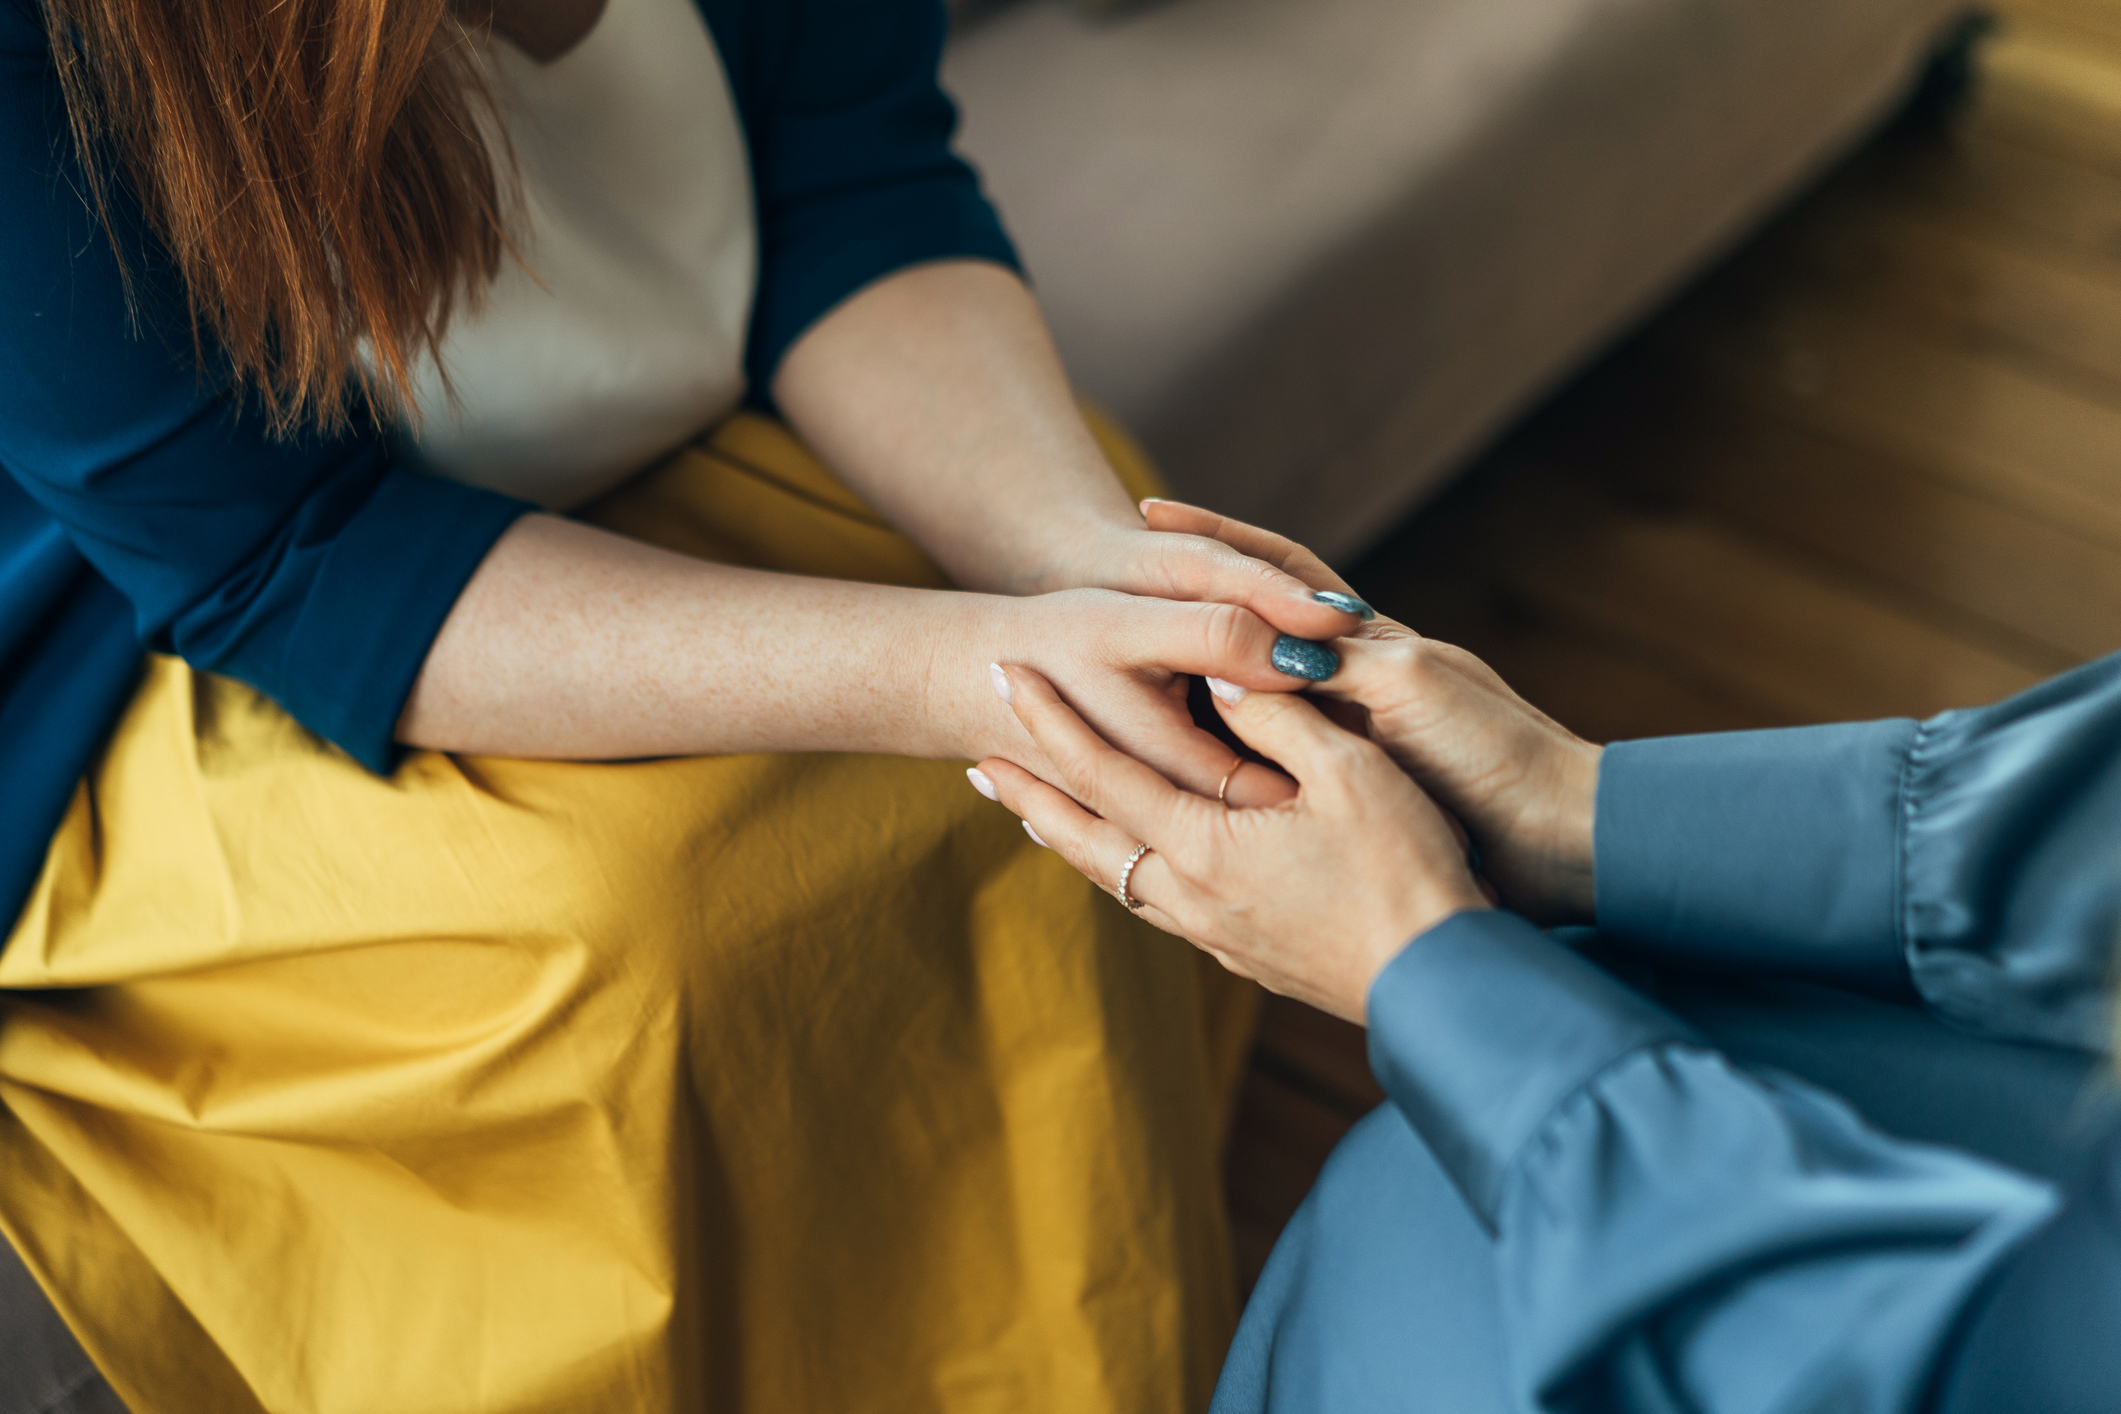 Two people are holding hands while counseling each other